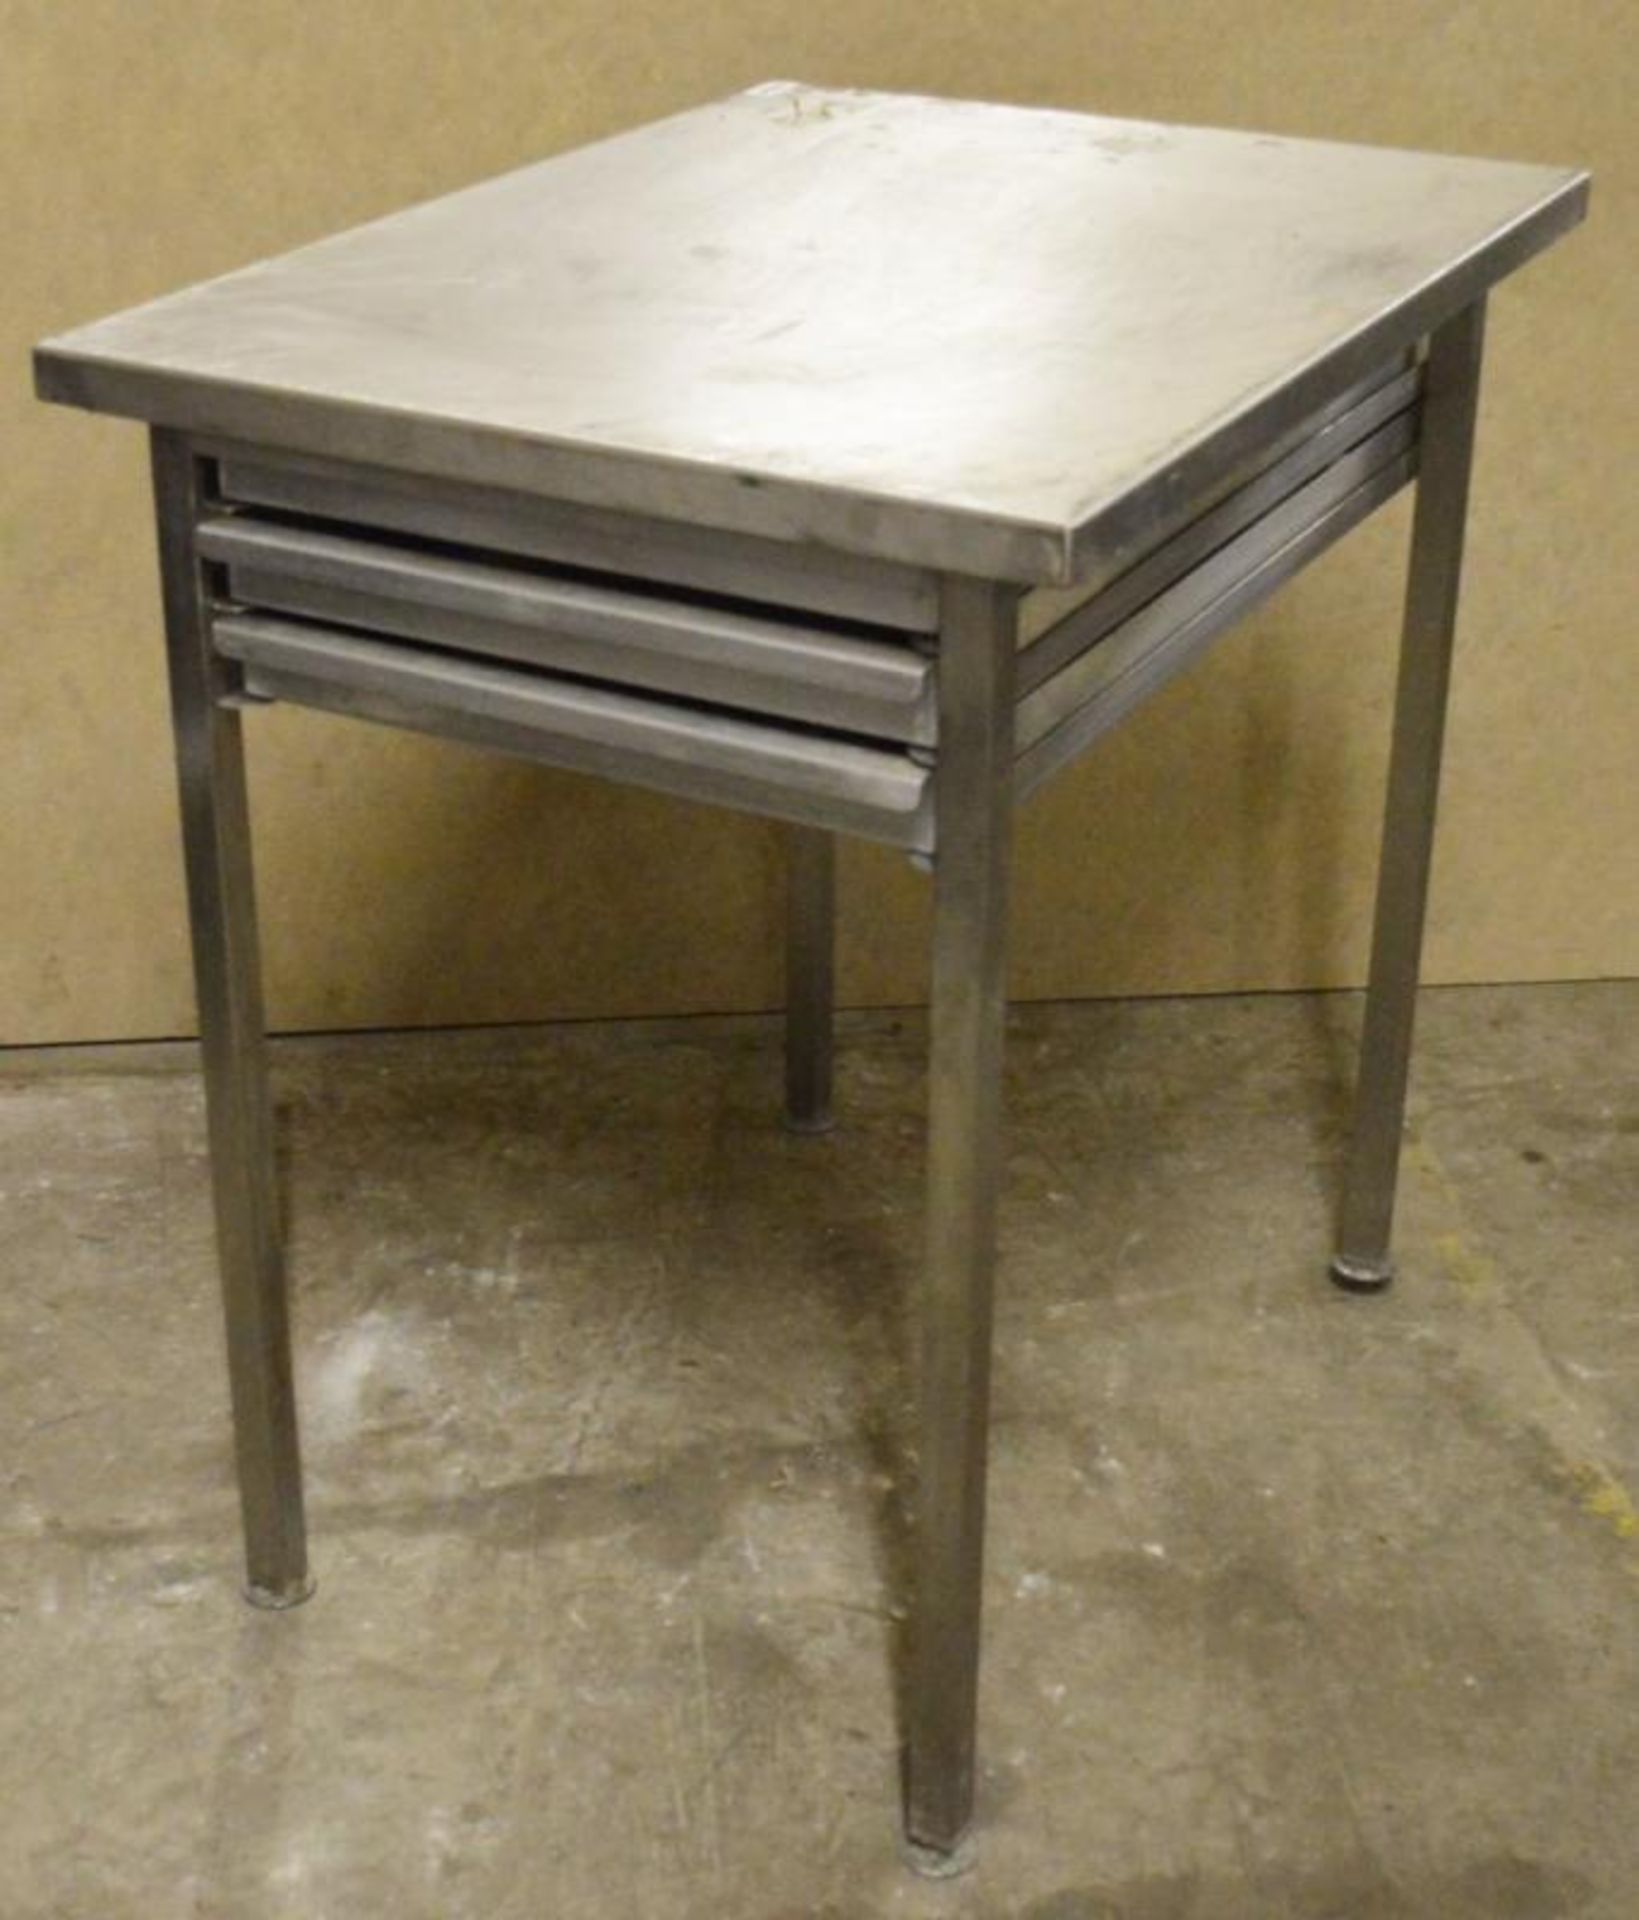 1 x Stainless Steel Bakers Preperation Table With Integrated Drawer System and Three Drawers - H87 x